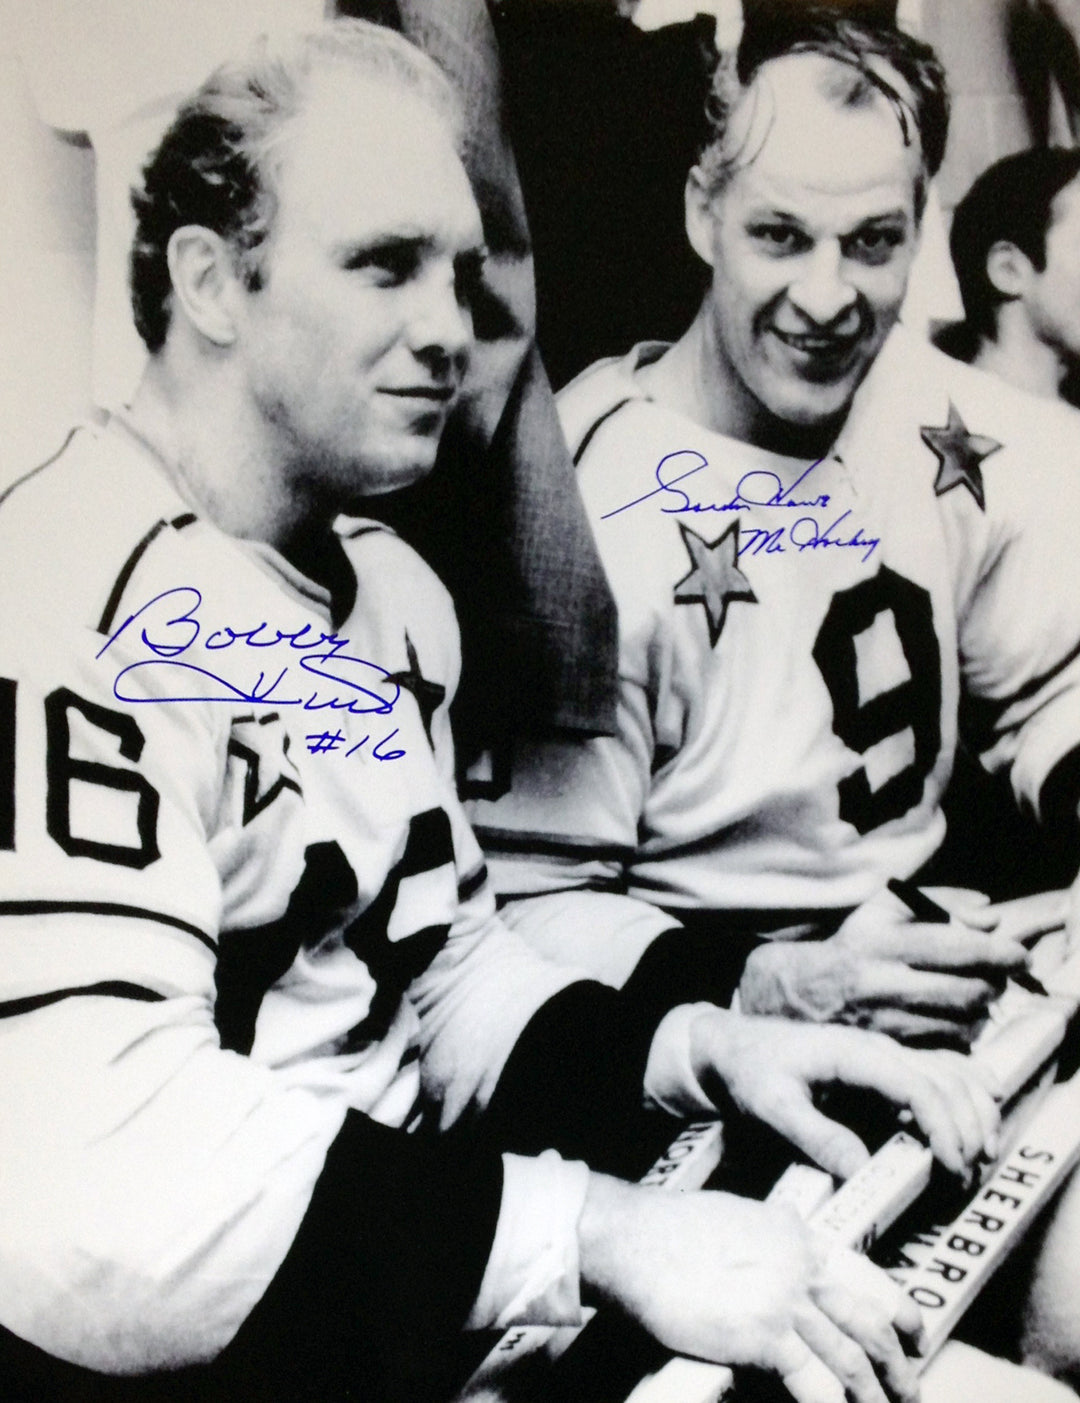 Bobby Hull And Gordie Howe Autographed 11X14 Photo, Chicago Blackhawks, Detroit Red Wings, NHL, Hockey, Autographed, Signed, AAHPH31212